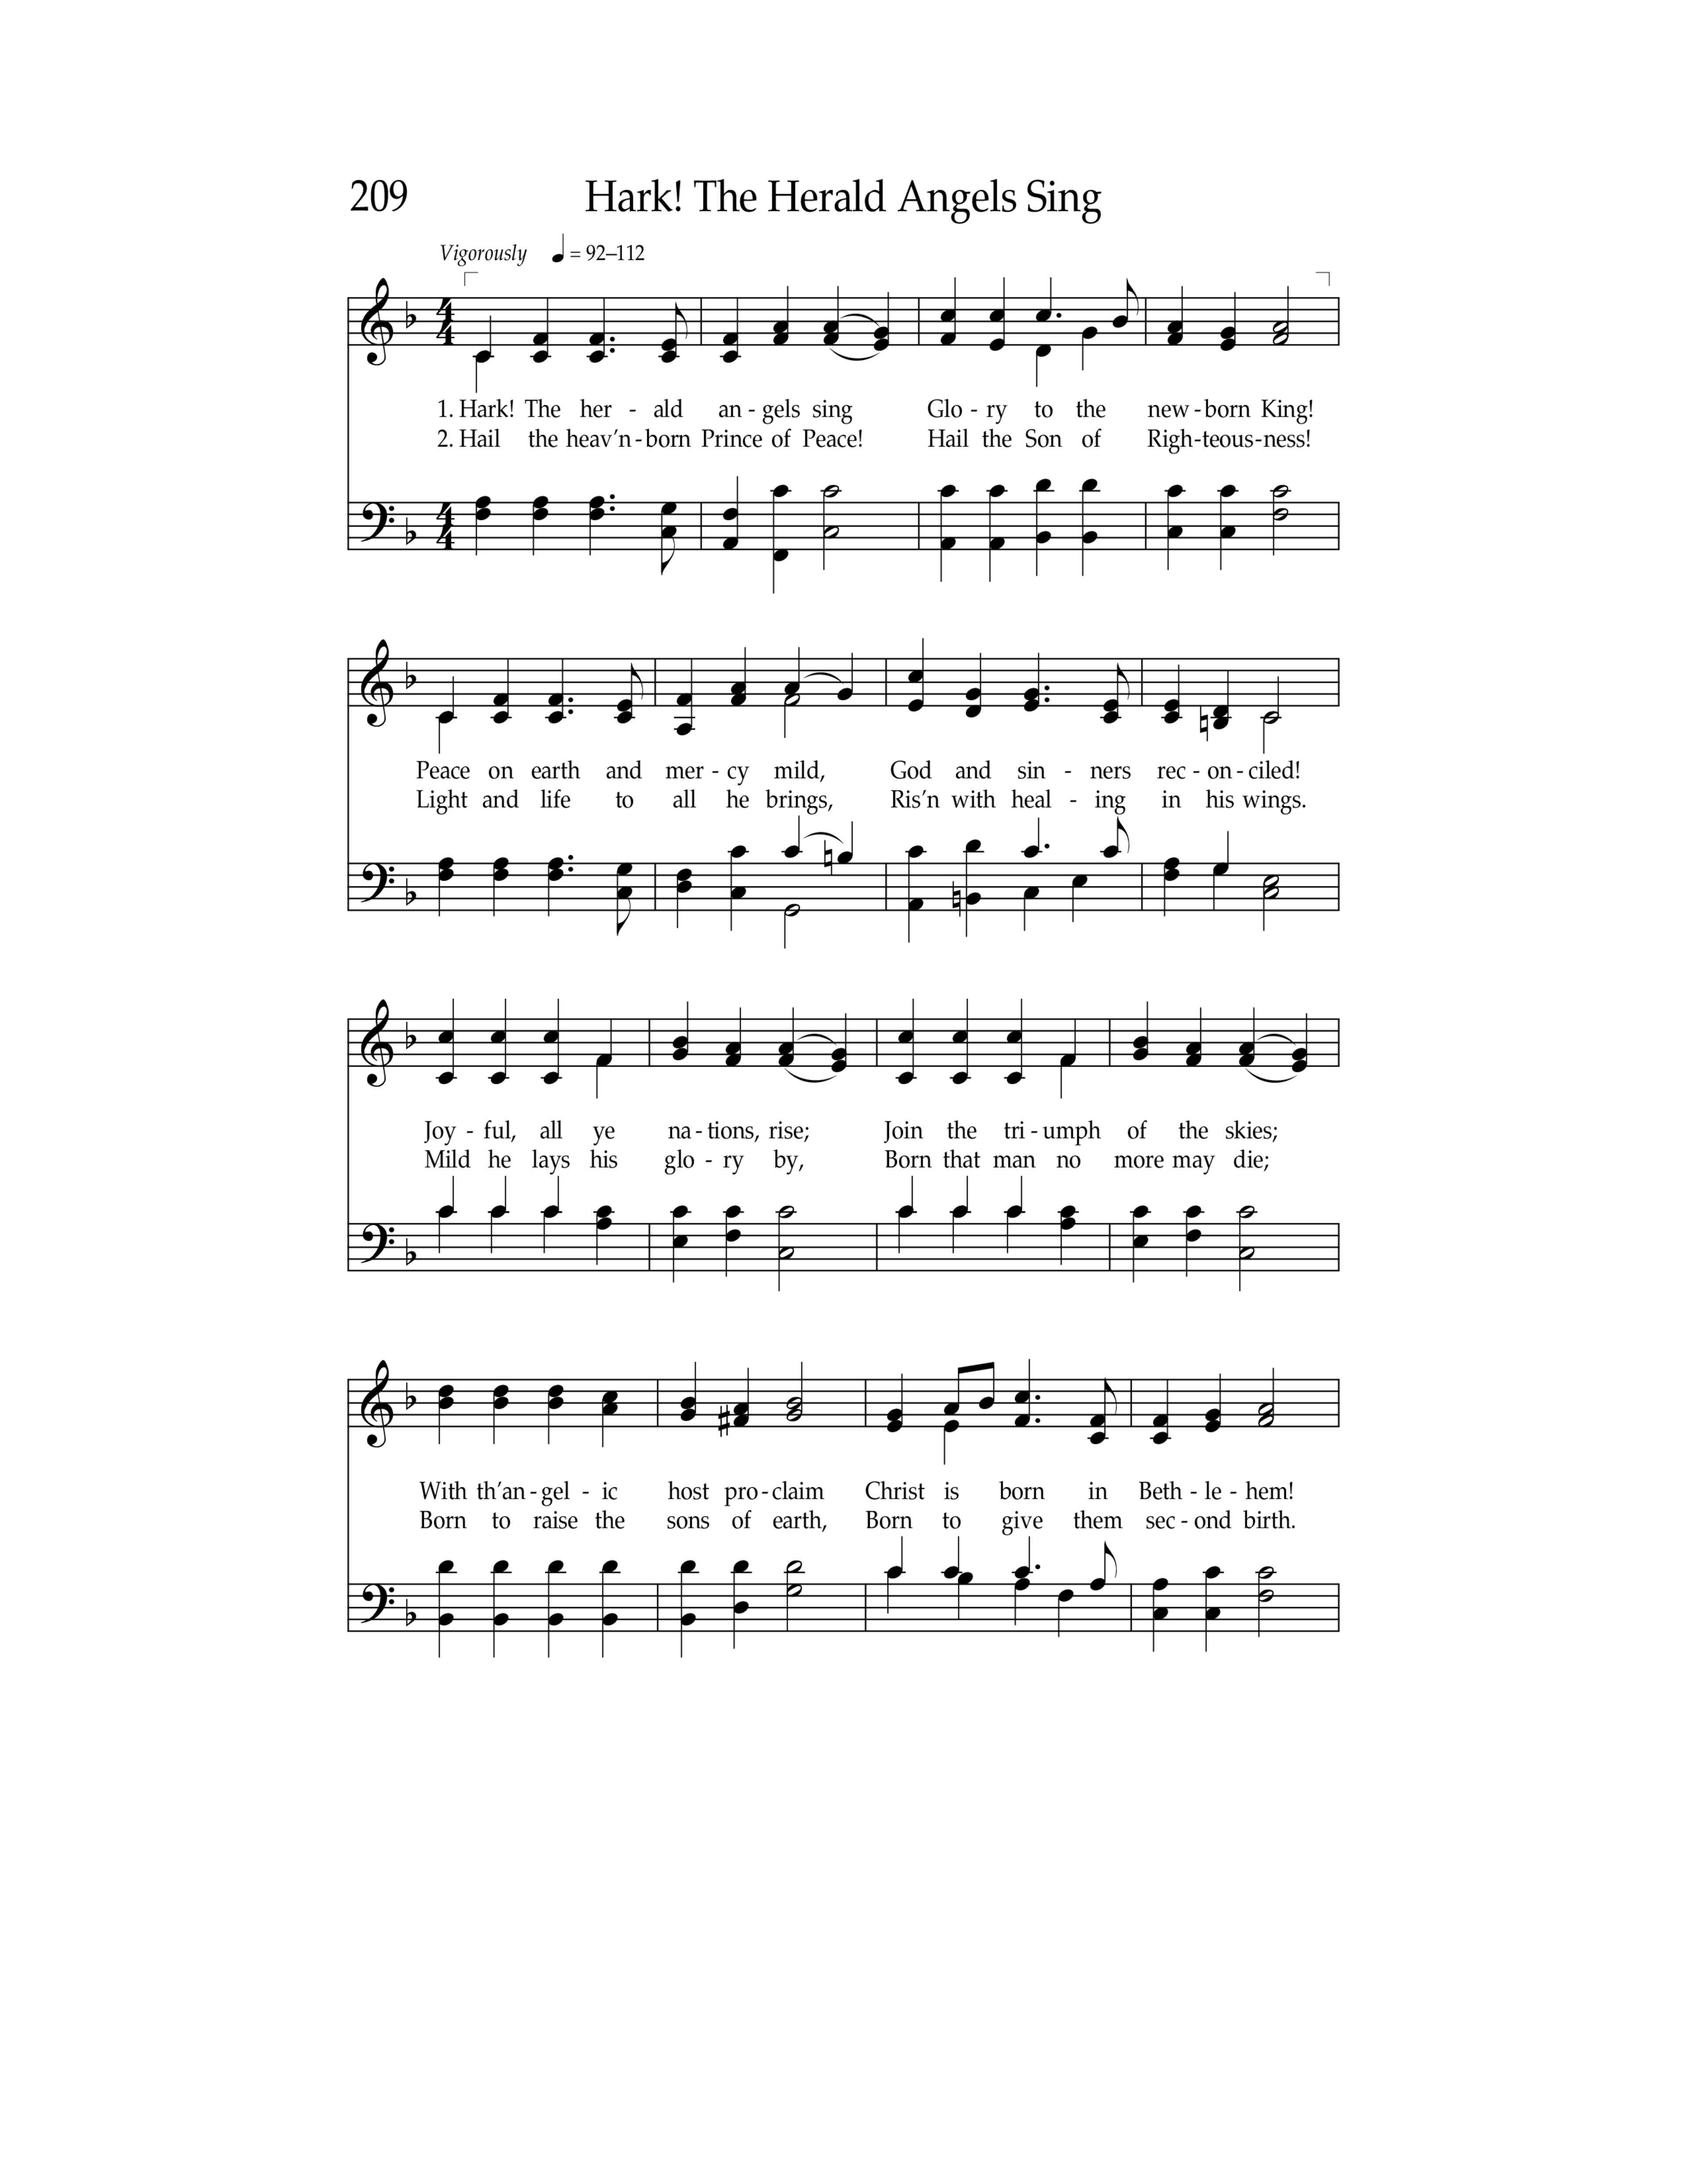 Sheet music for the hymn "Hark! The Herald Angels Sing" (English).